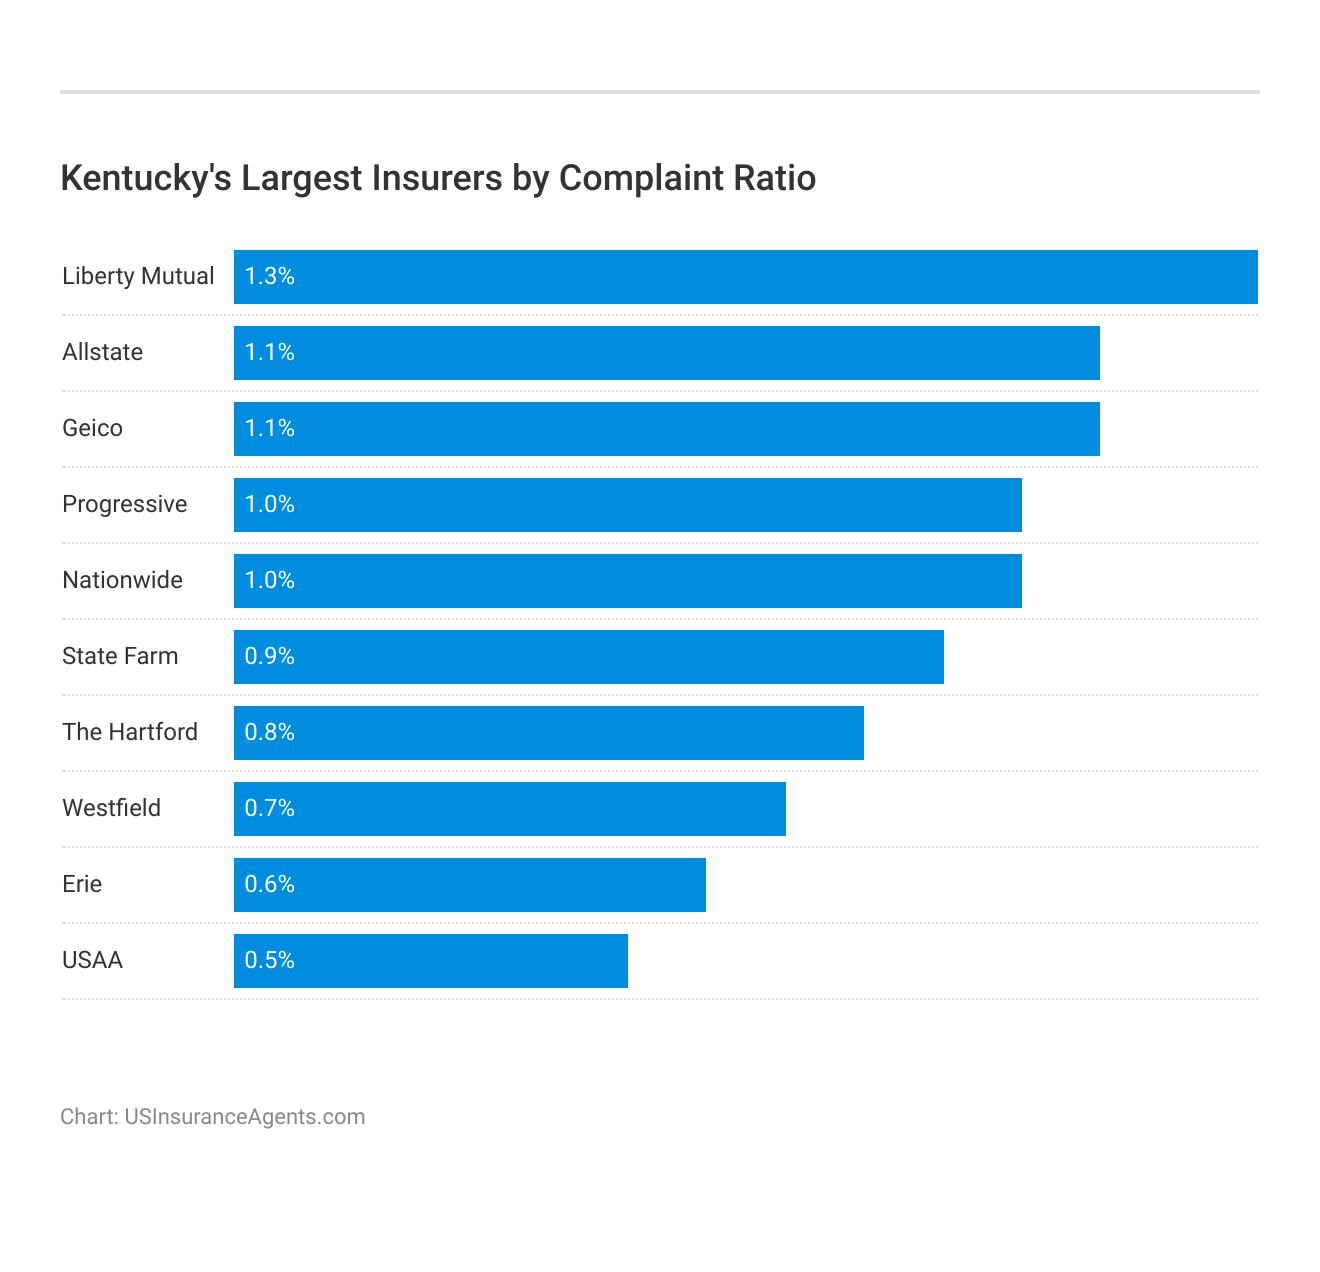 <h3>Kentucky's Largest Insurers by Complaint Ratio</h3>